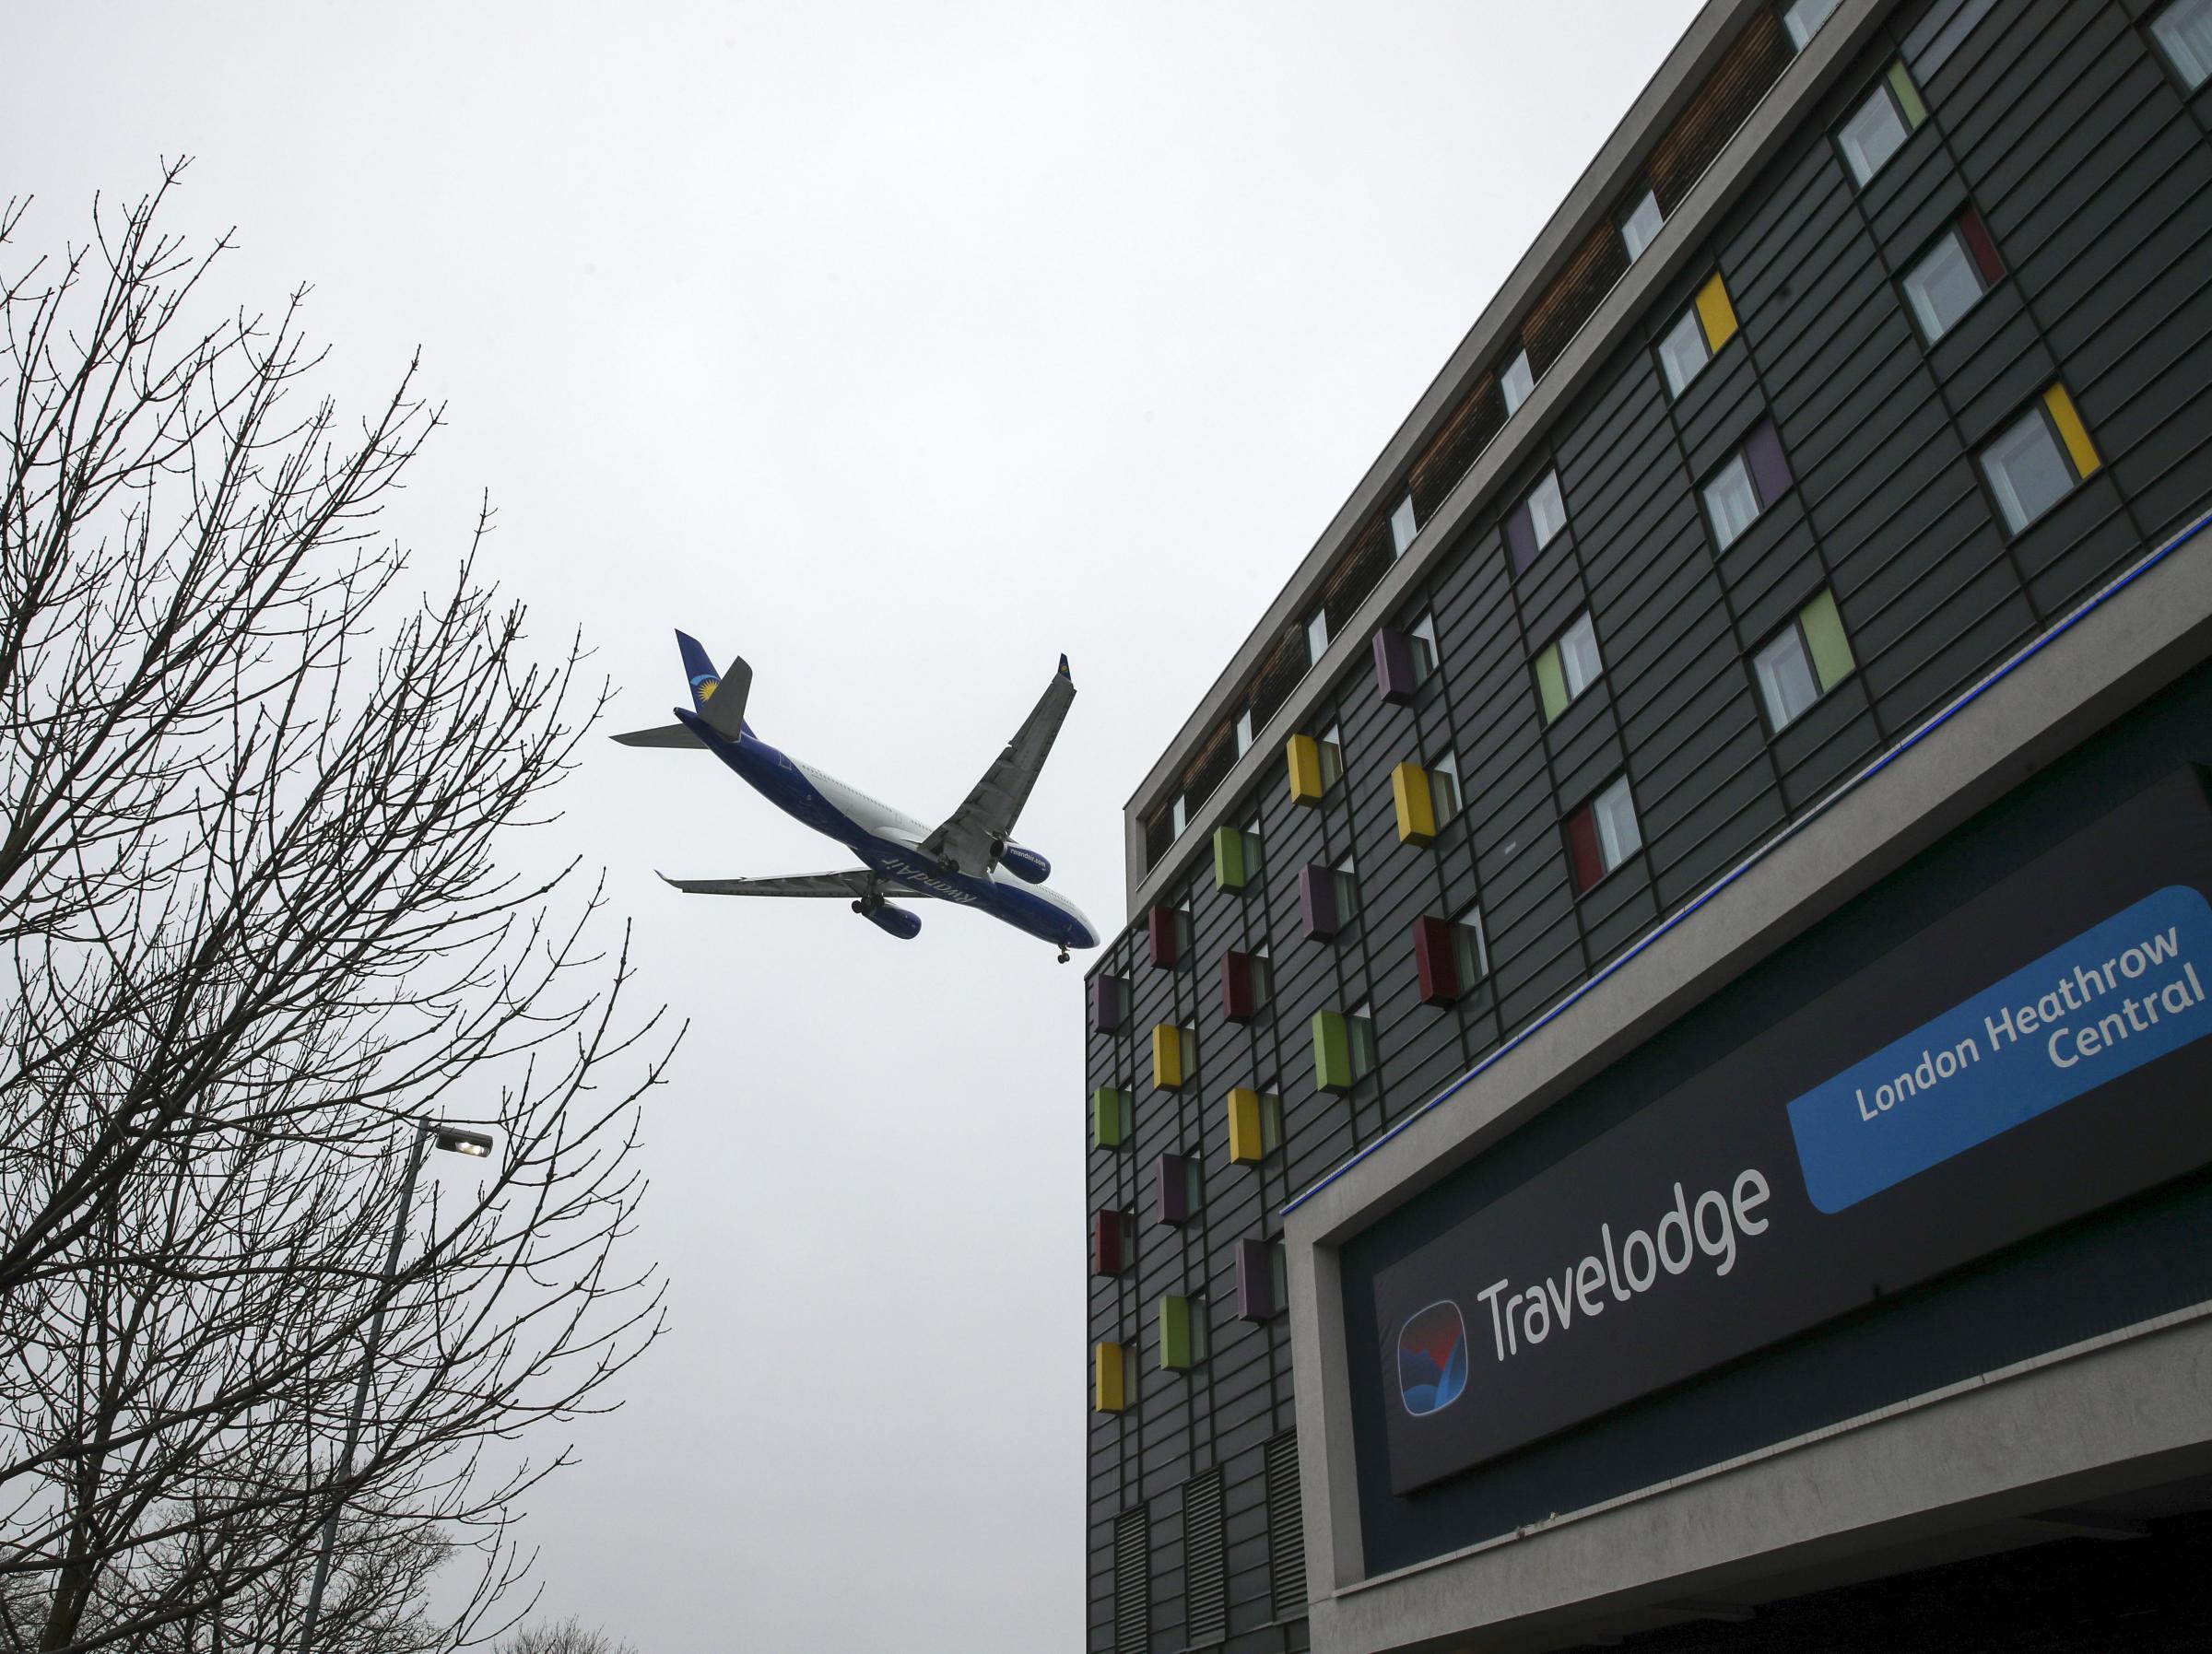 Travelodge wants to build 14 brand new hotels in Essex - this is where. Picture: PA